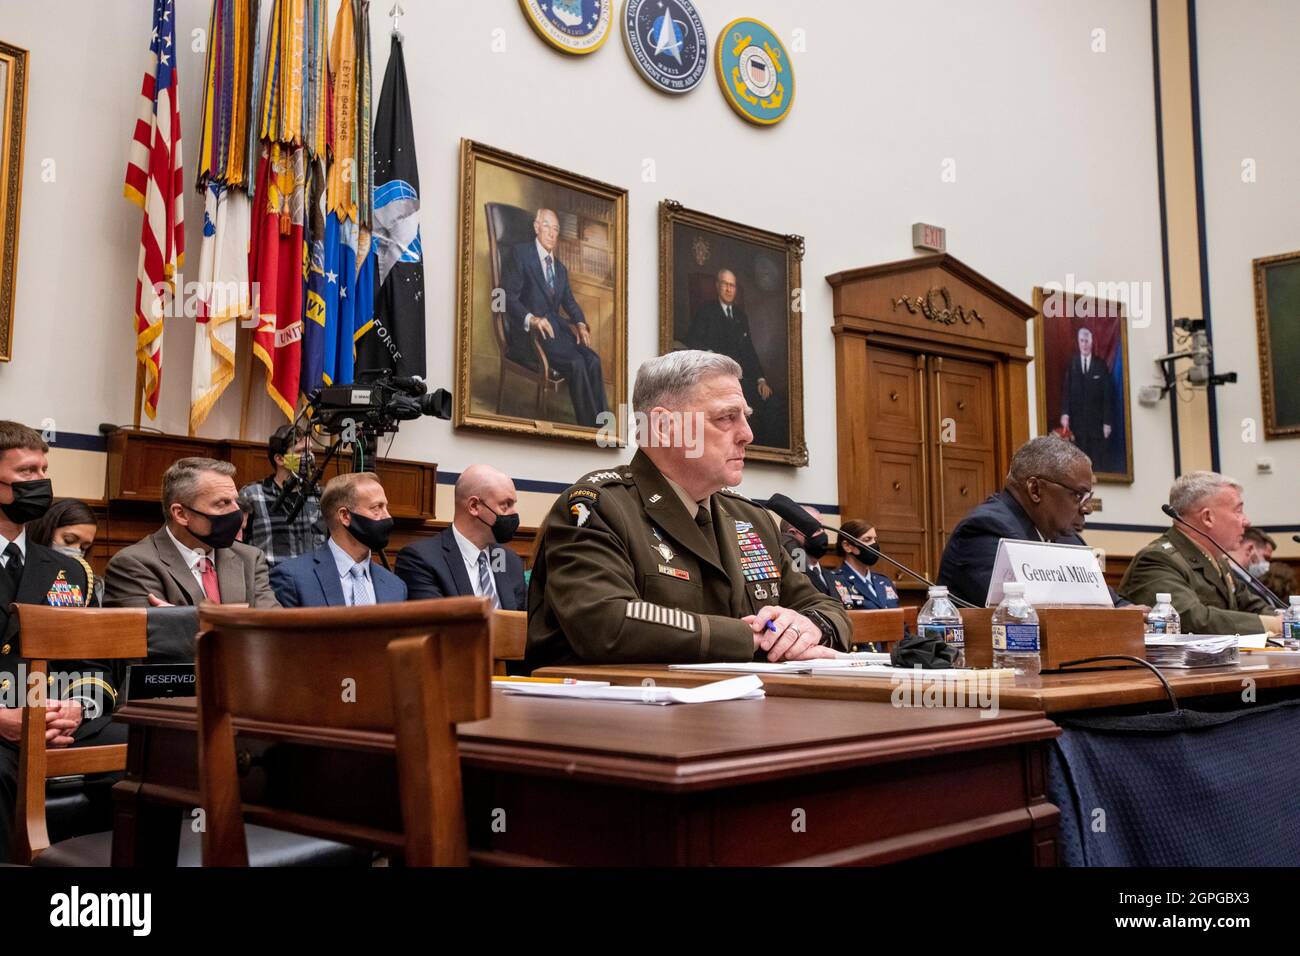 United States Army General Mark A. Milley, Chairman of the Joint Chiefs of Staff, left, United States Secretary of Defense Lloyd J. Austin III, center, and General Kenneth McKenzie Jr., USMC Commander, U.S. Central Command, right, appear before a House Armed Services Committee hearing on âEnding the U.S. Military Mission in Afghanistanâ in the Rayburn House Office Building in Washington, DC, Wednesday, September 29, 2021. Credit: Rod Lamkey/Pool via CNP Stock Photo